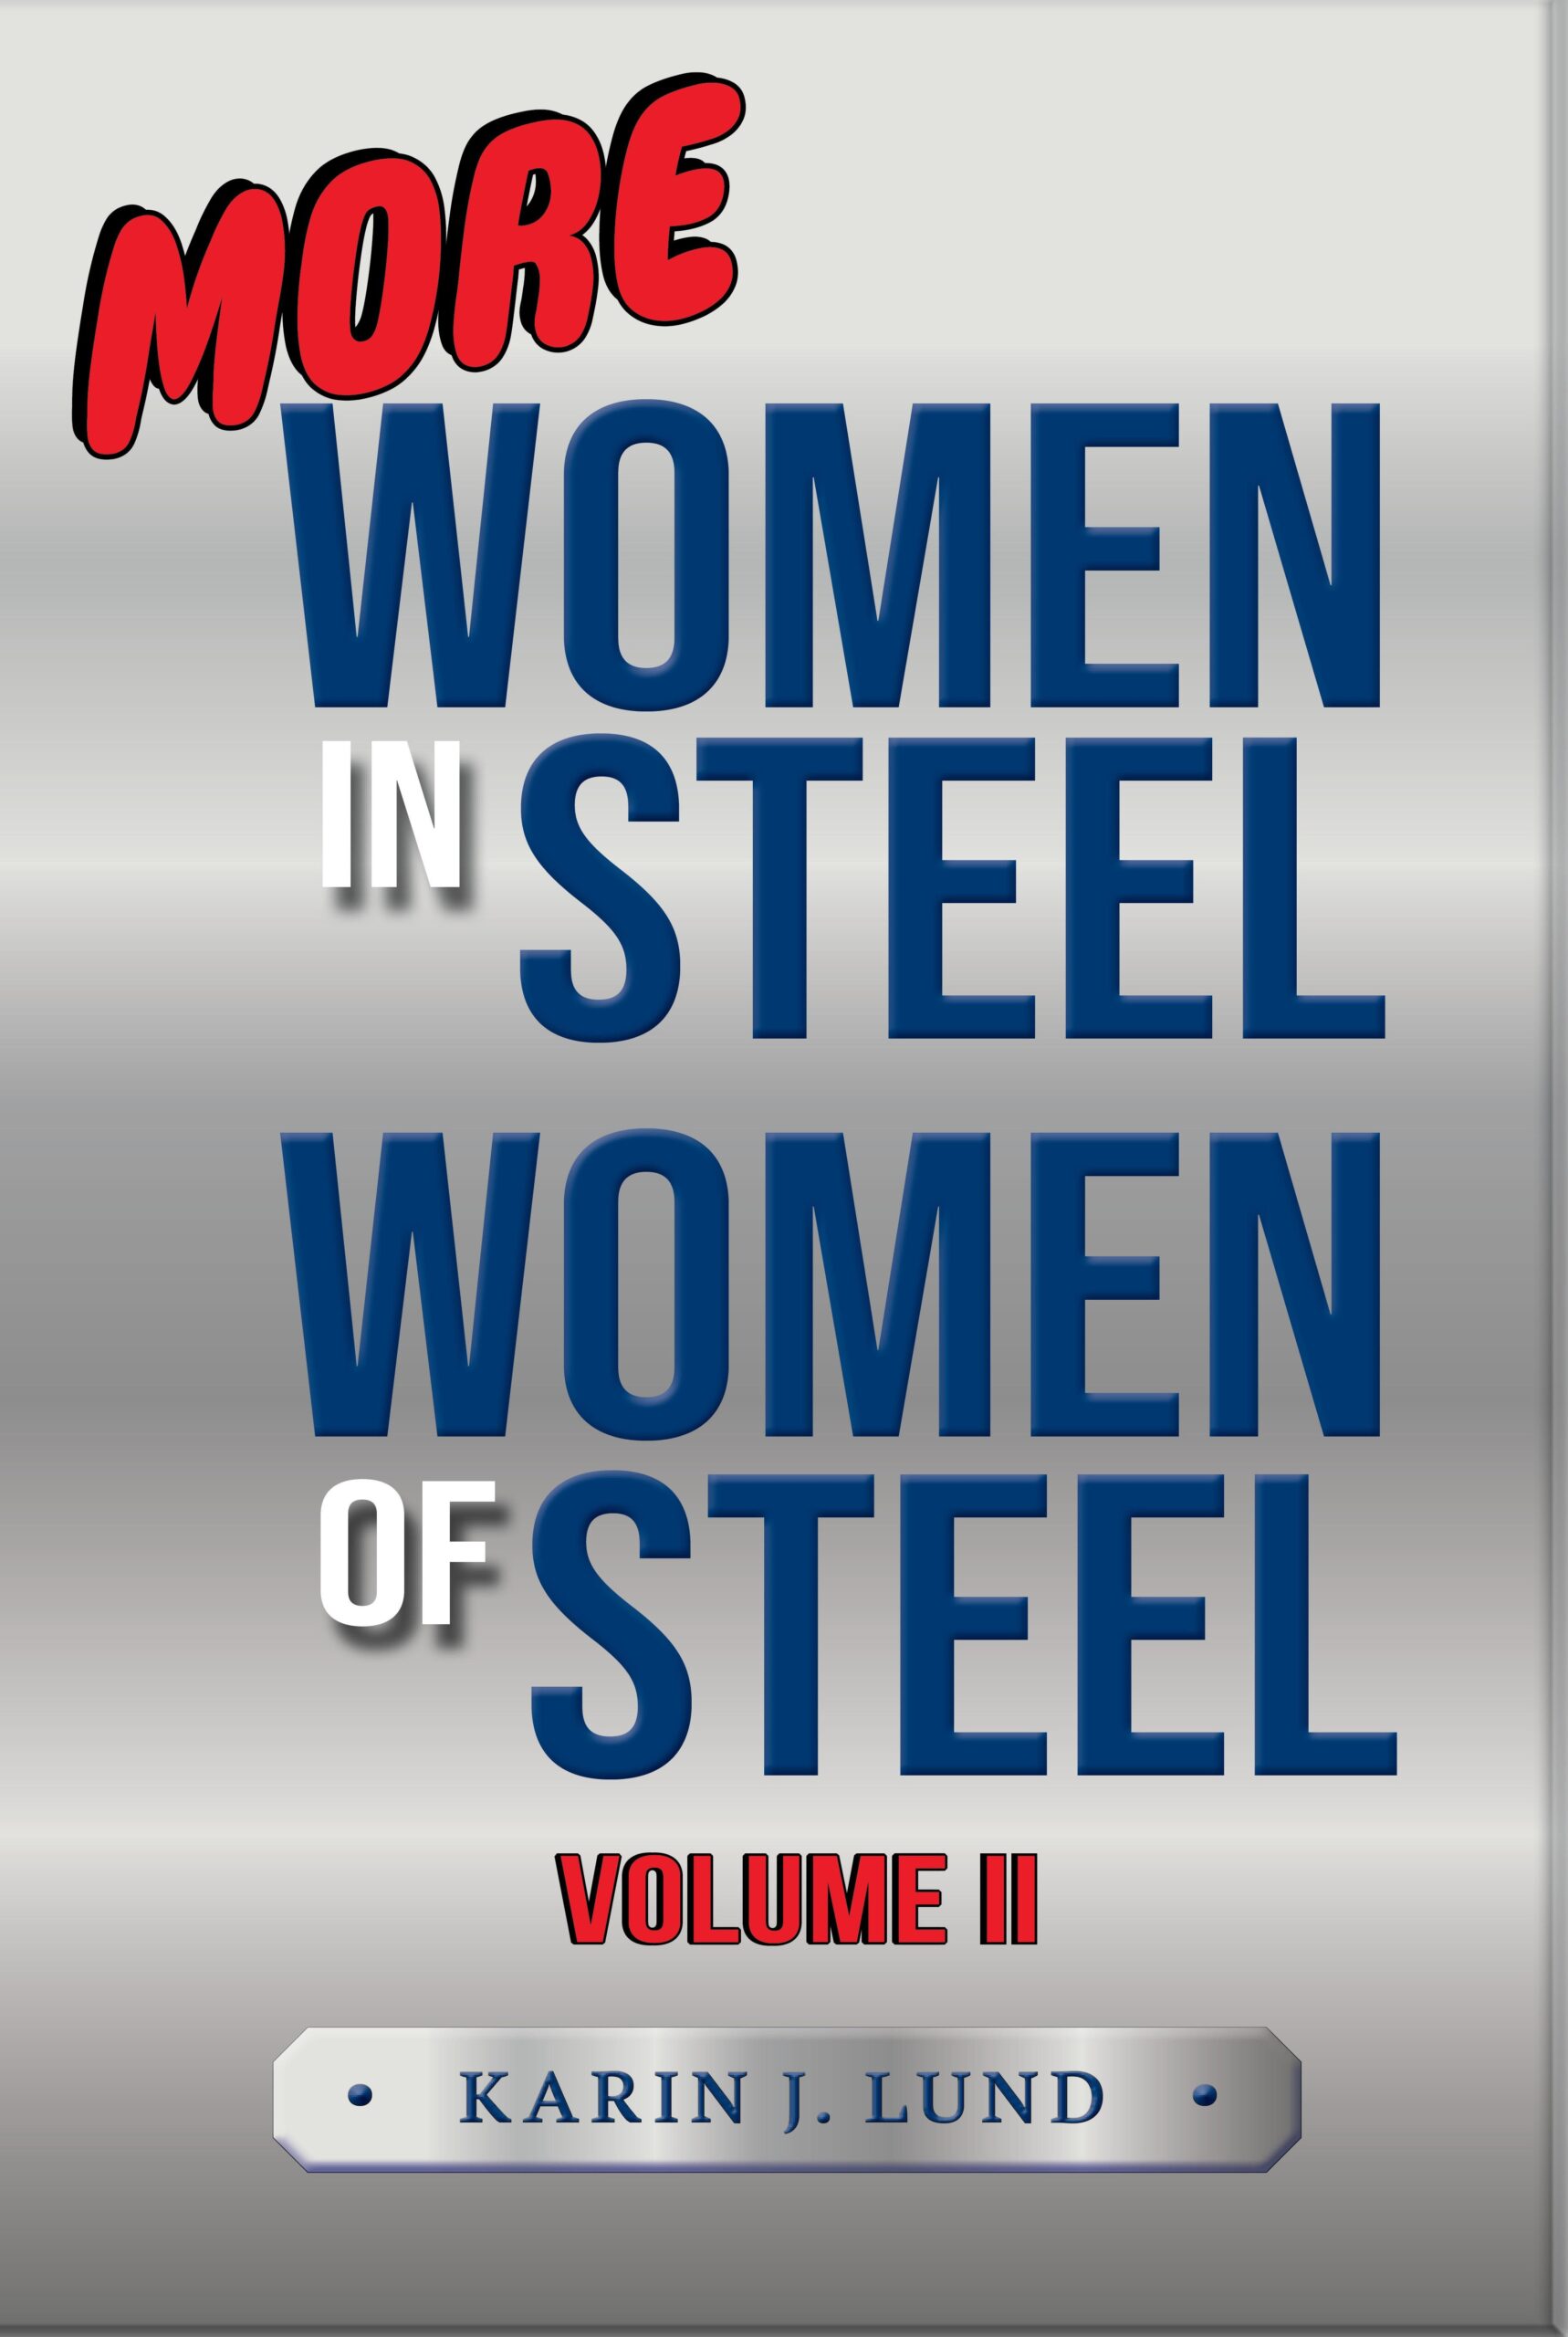 Woman in Steel Woman of Steel Front Book Cover